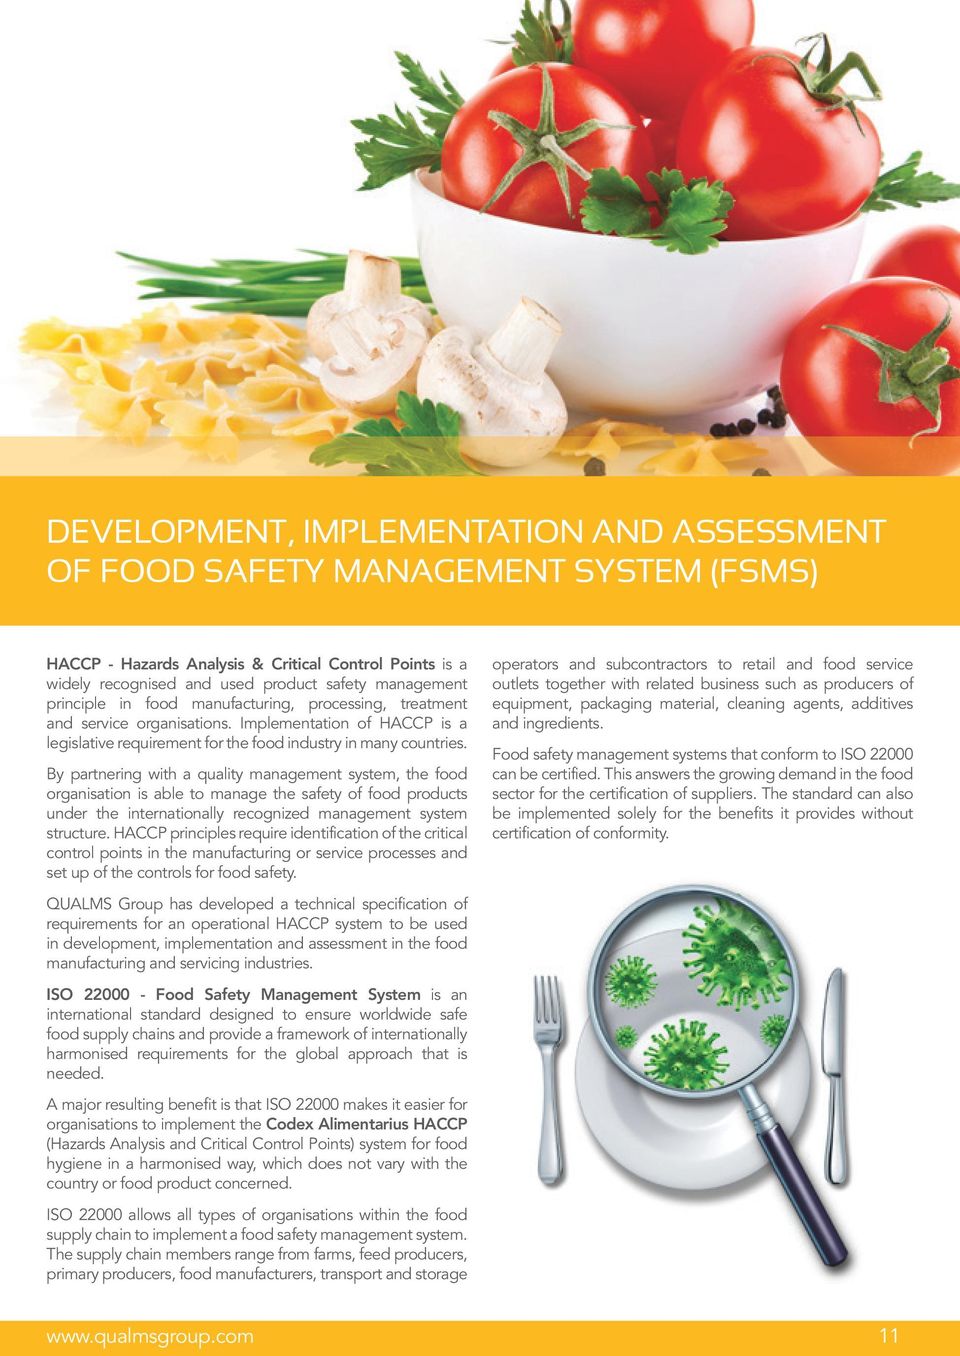 By partnering with a quality management system, the food organisation is able to manage the safety of food products under the internationally recognized management system structure.